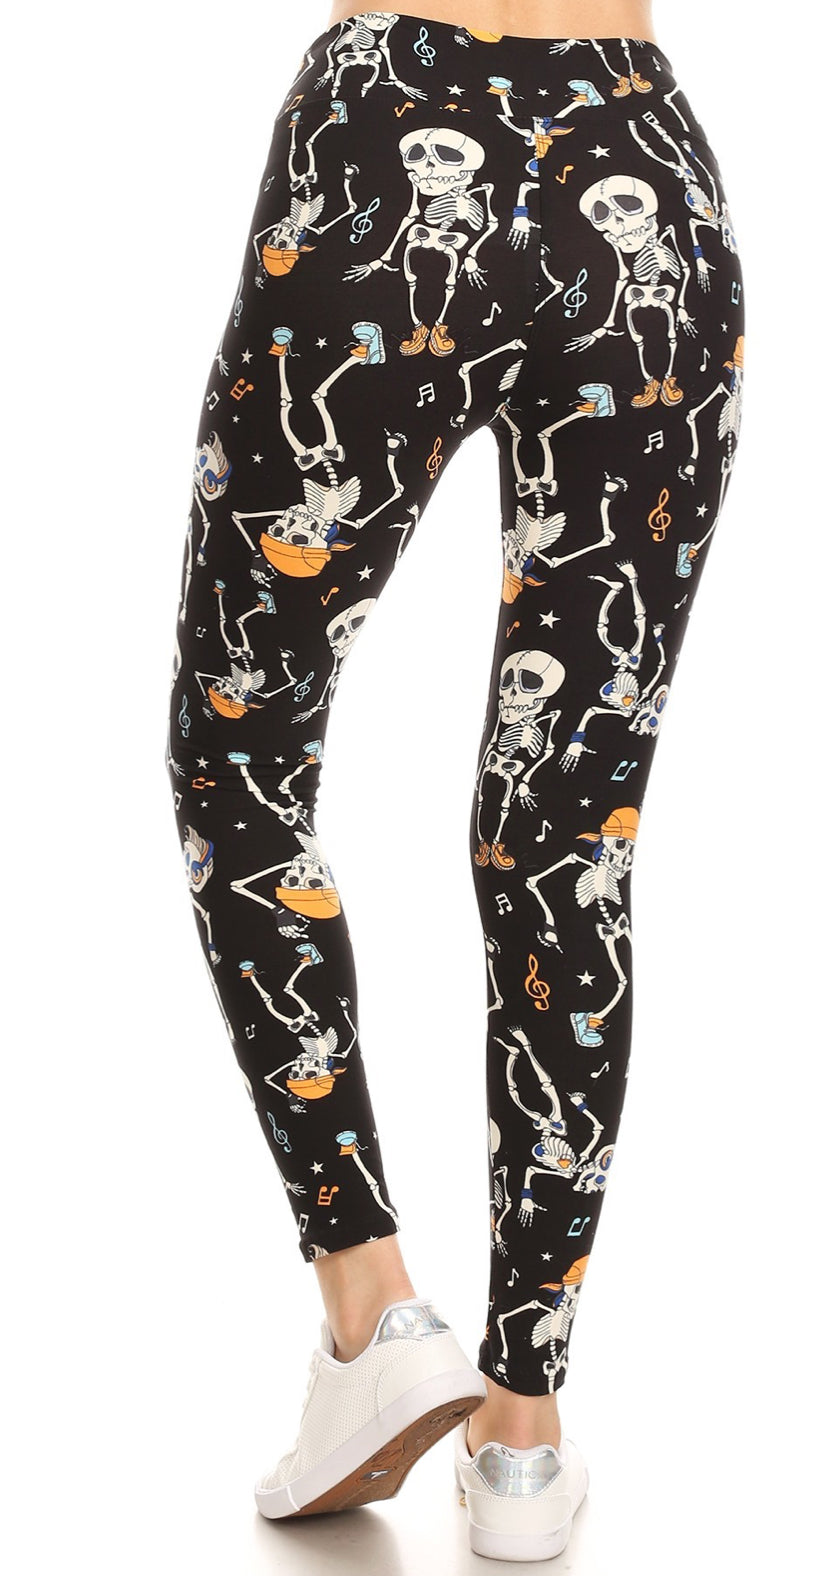 Shake, Rattle and Roll Leggings